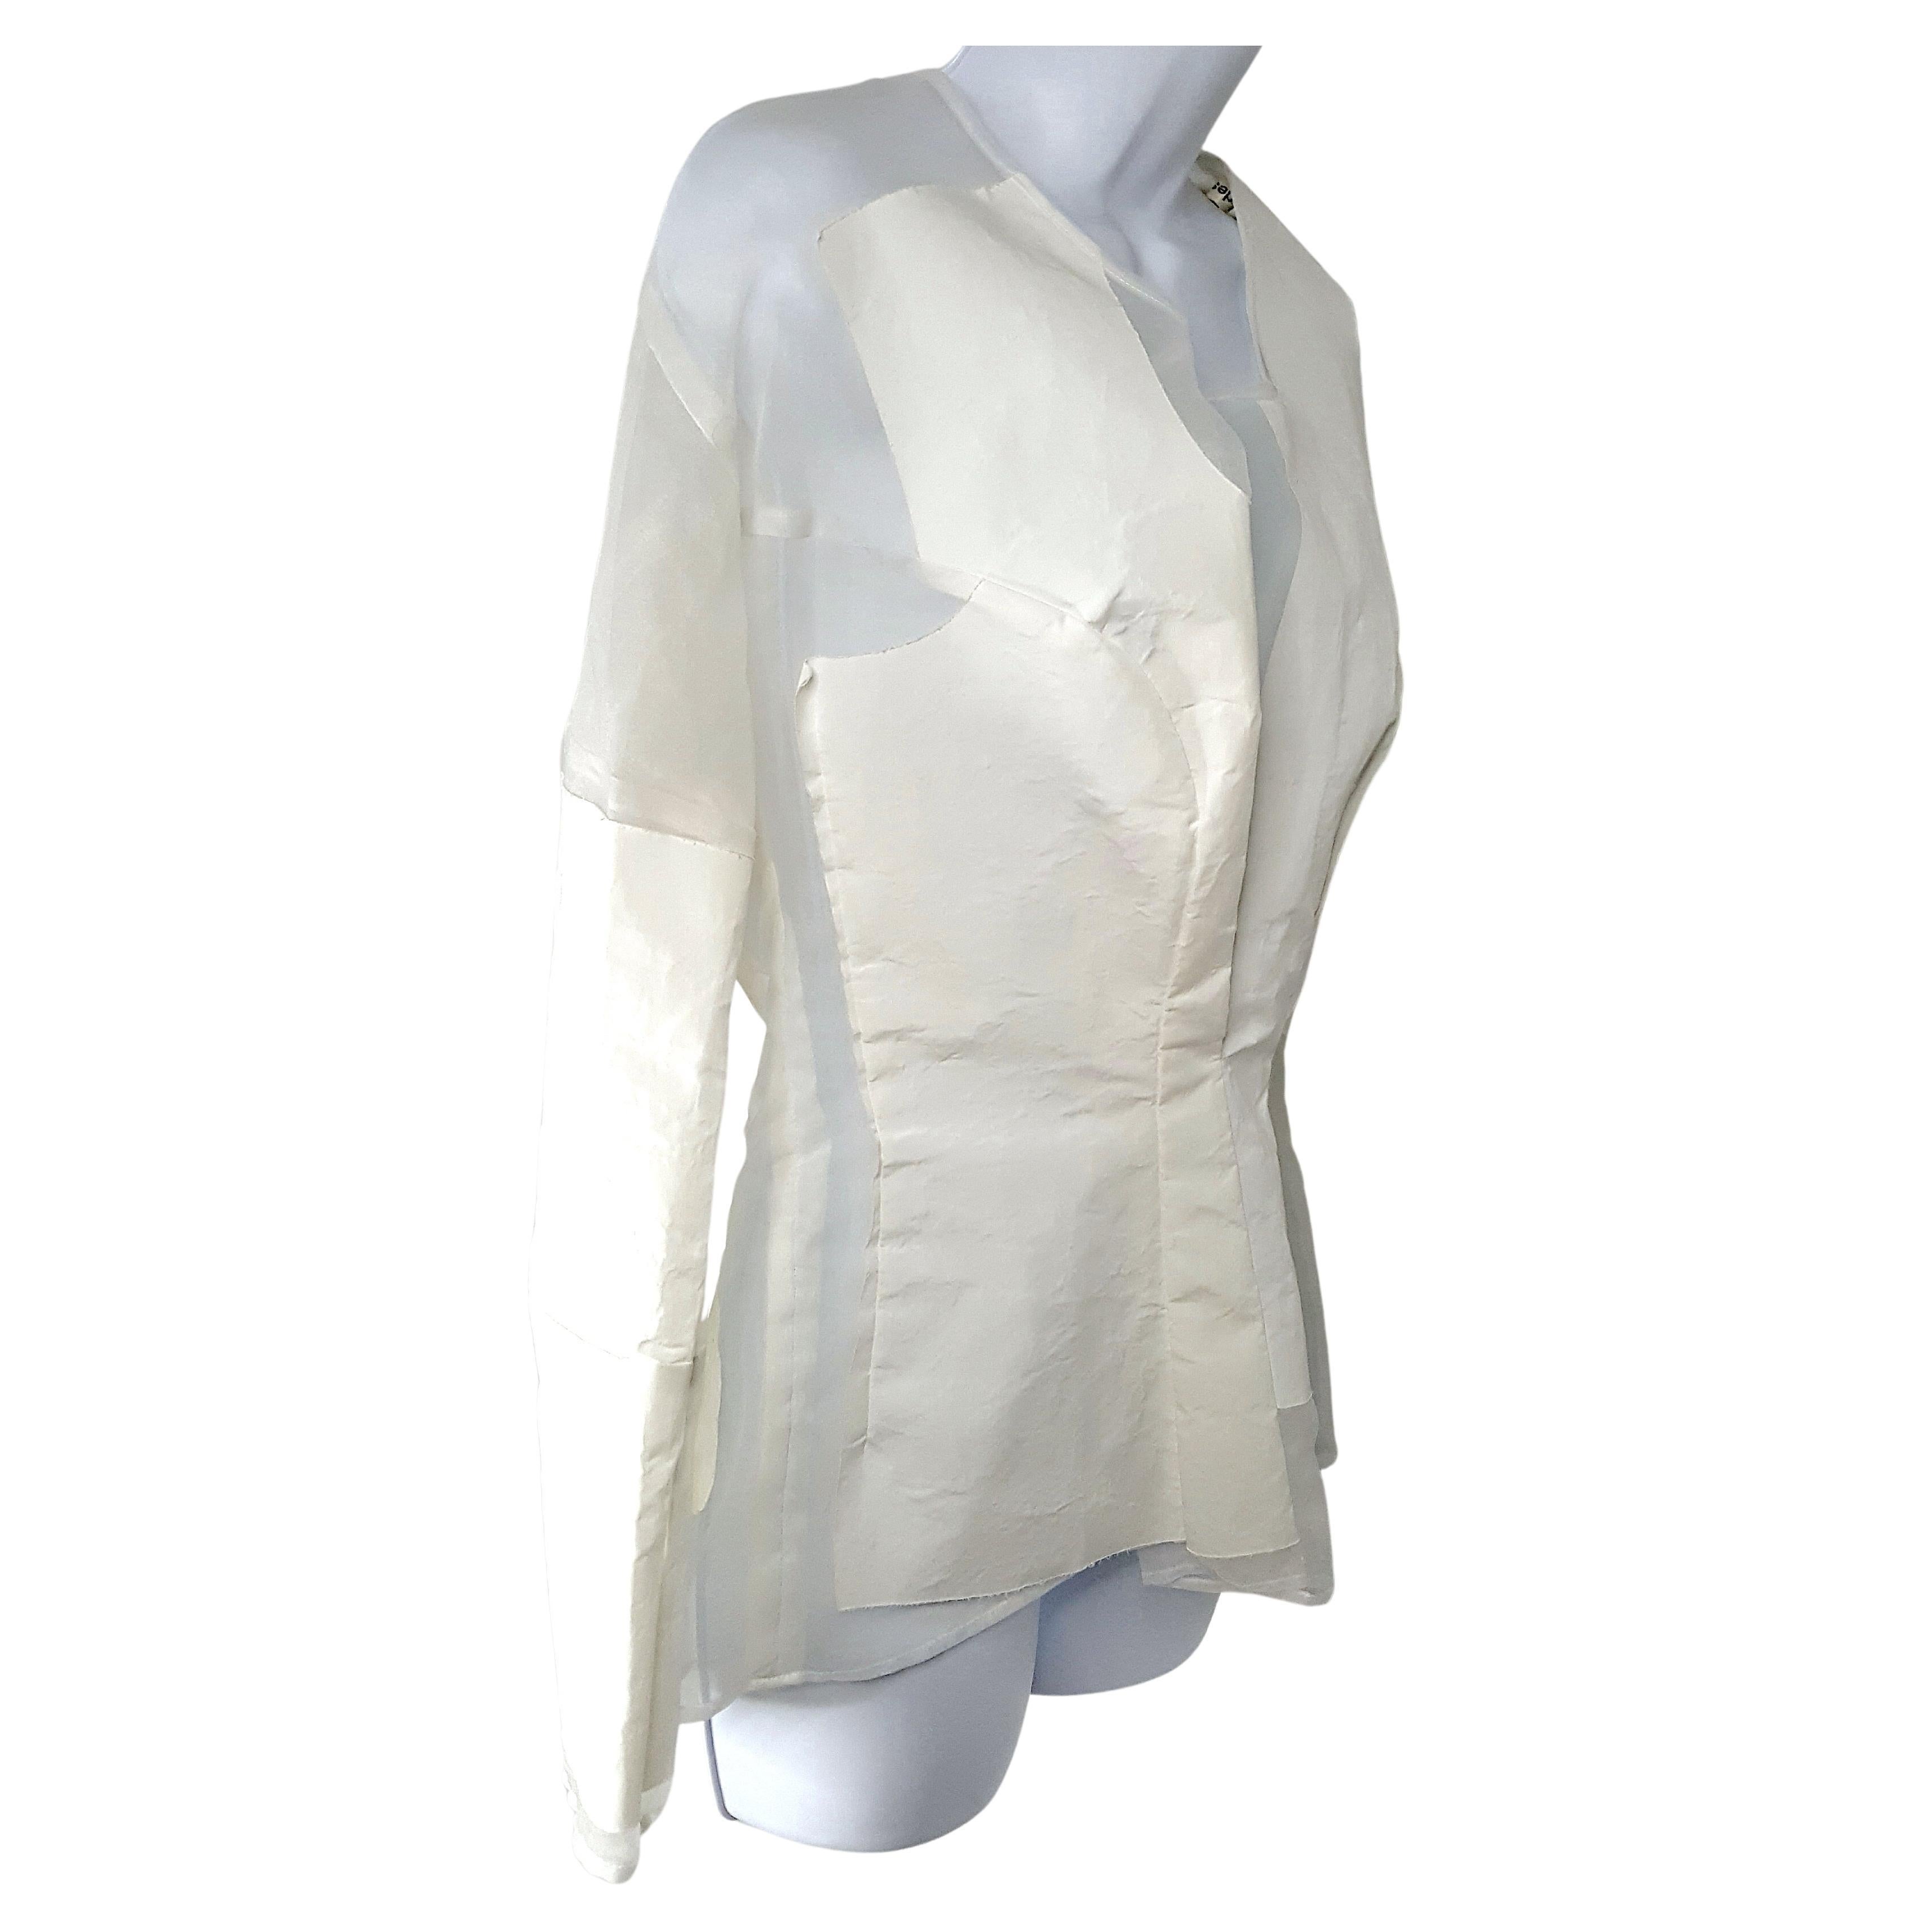 CommeDesGarcons 1997 AdultPunk Transparent EcruOrganza WhiteSilk Blouse Jacket  In Good Condition For Sale In Chicago, IL